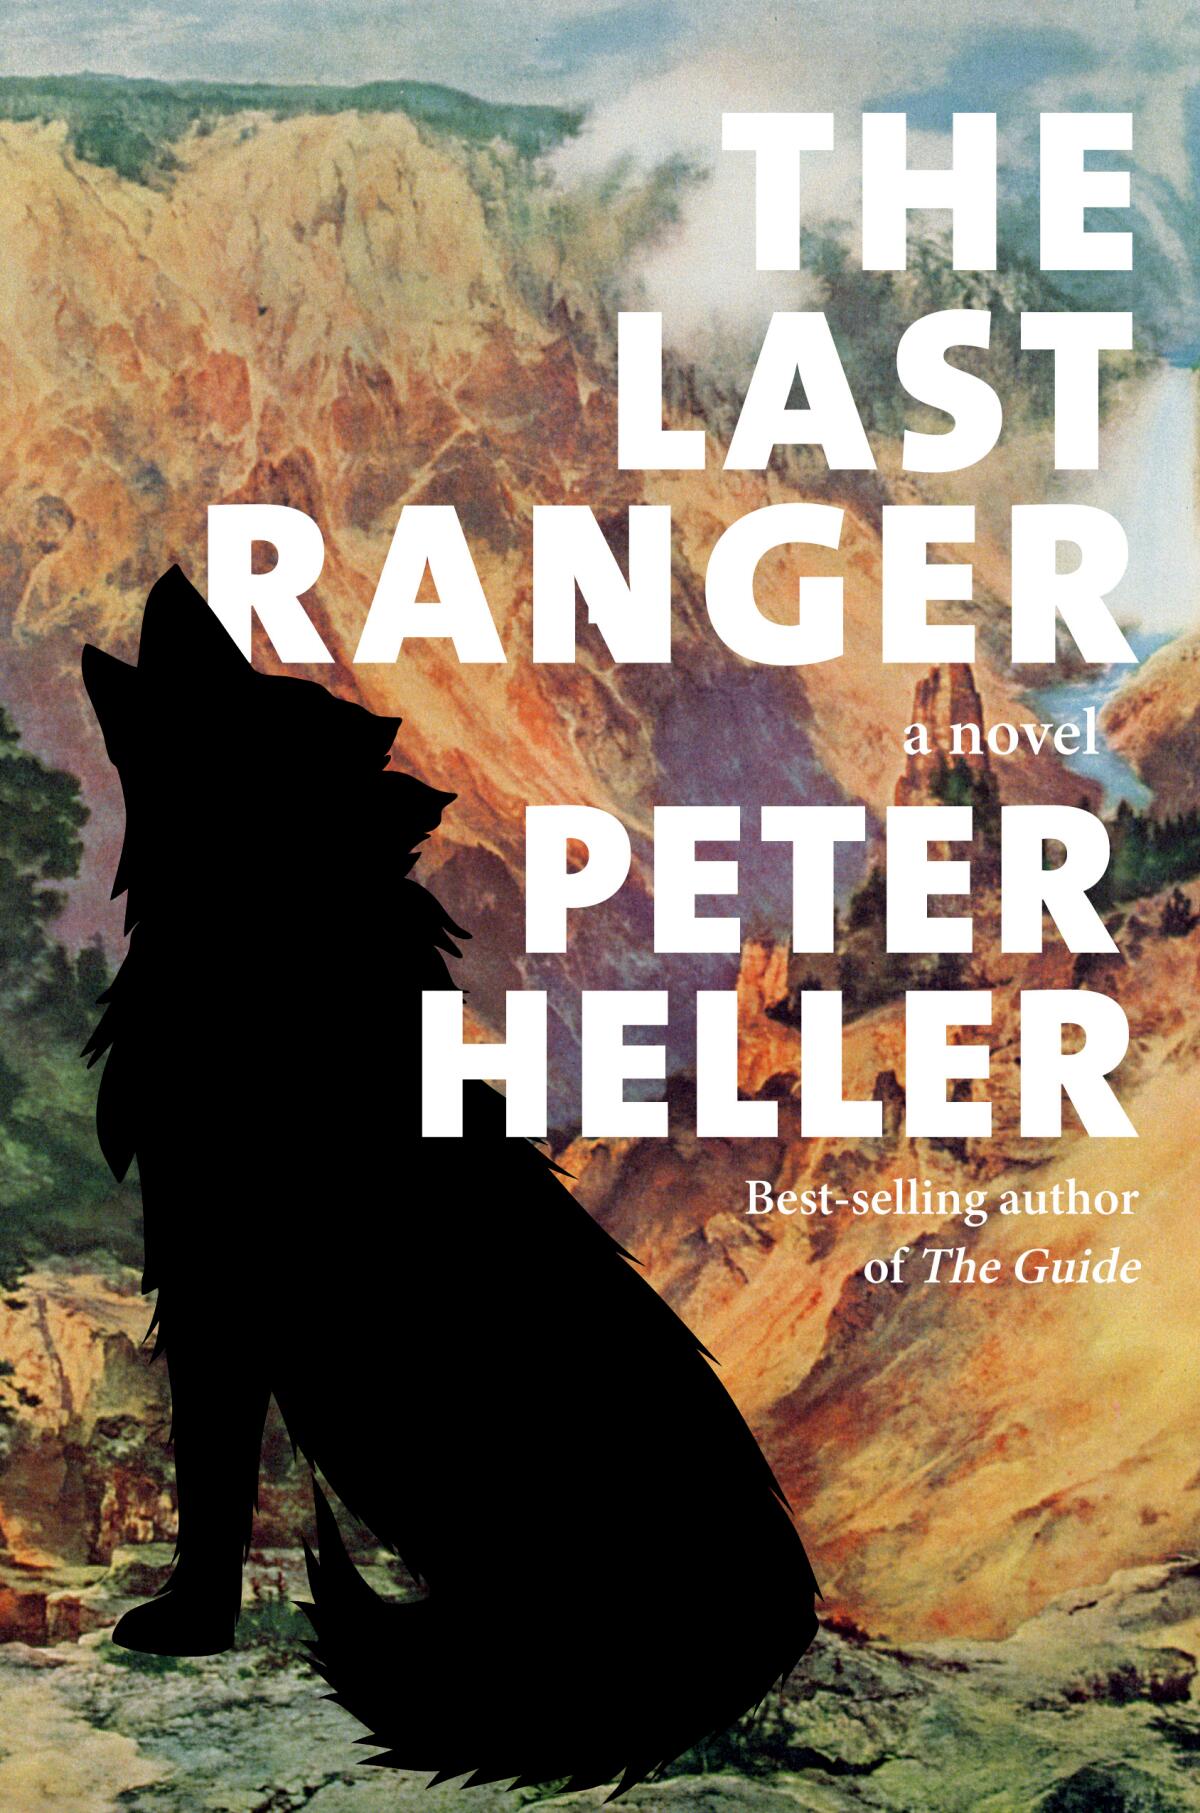 The book cover for "The Last Ranger" by Peter Heller features an illustration of mountains and a howling wolf silhouette.